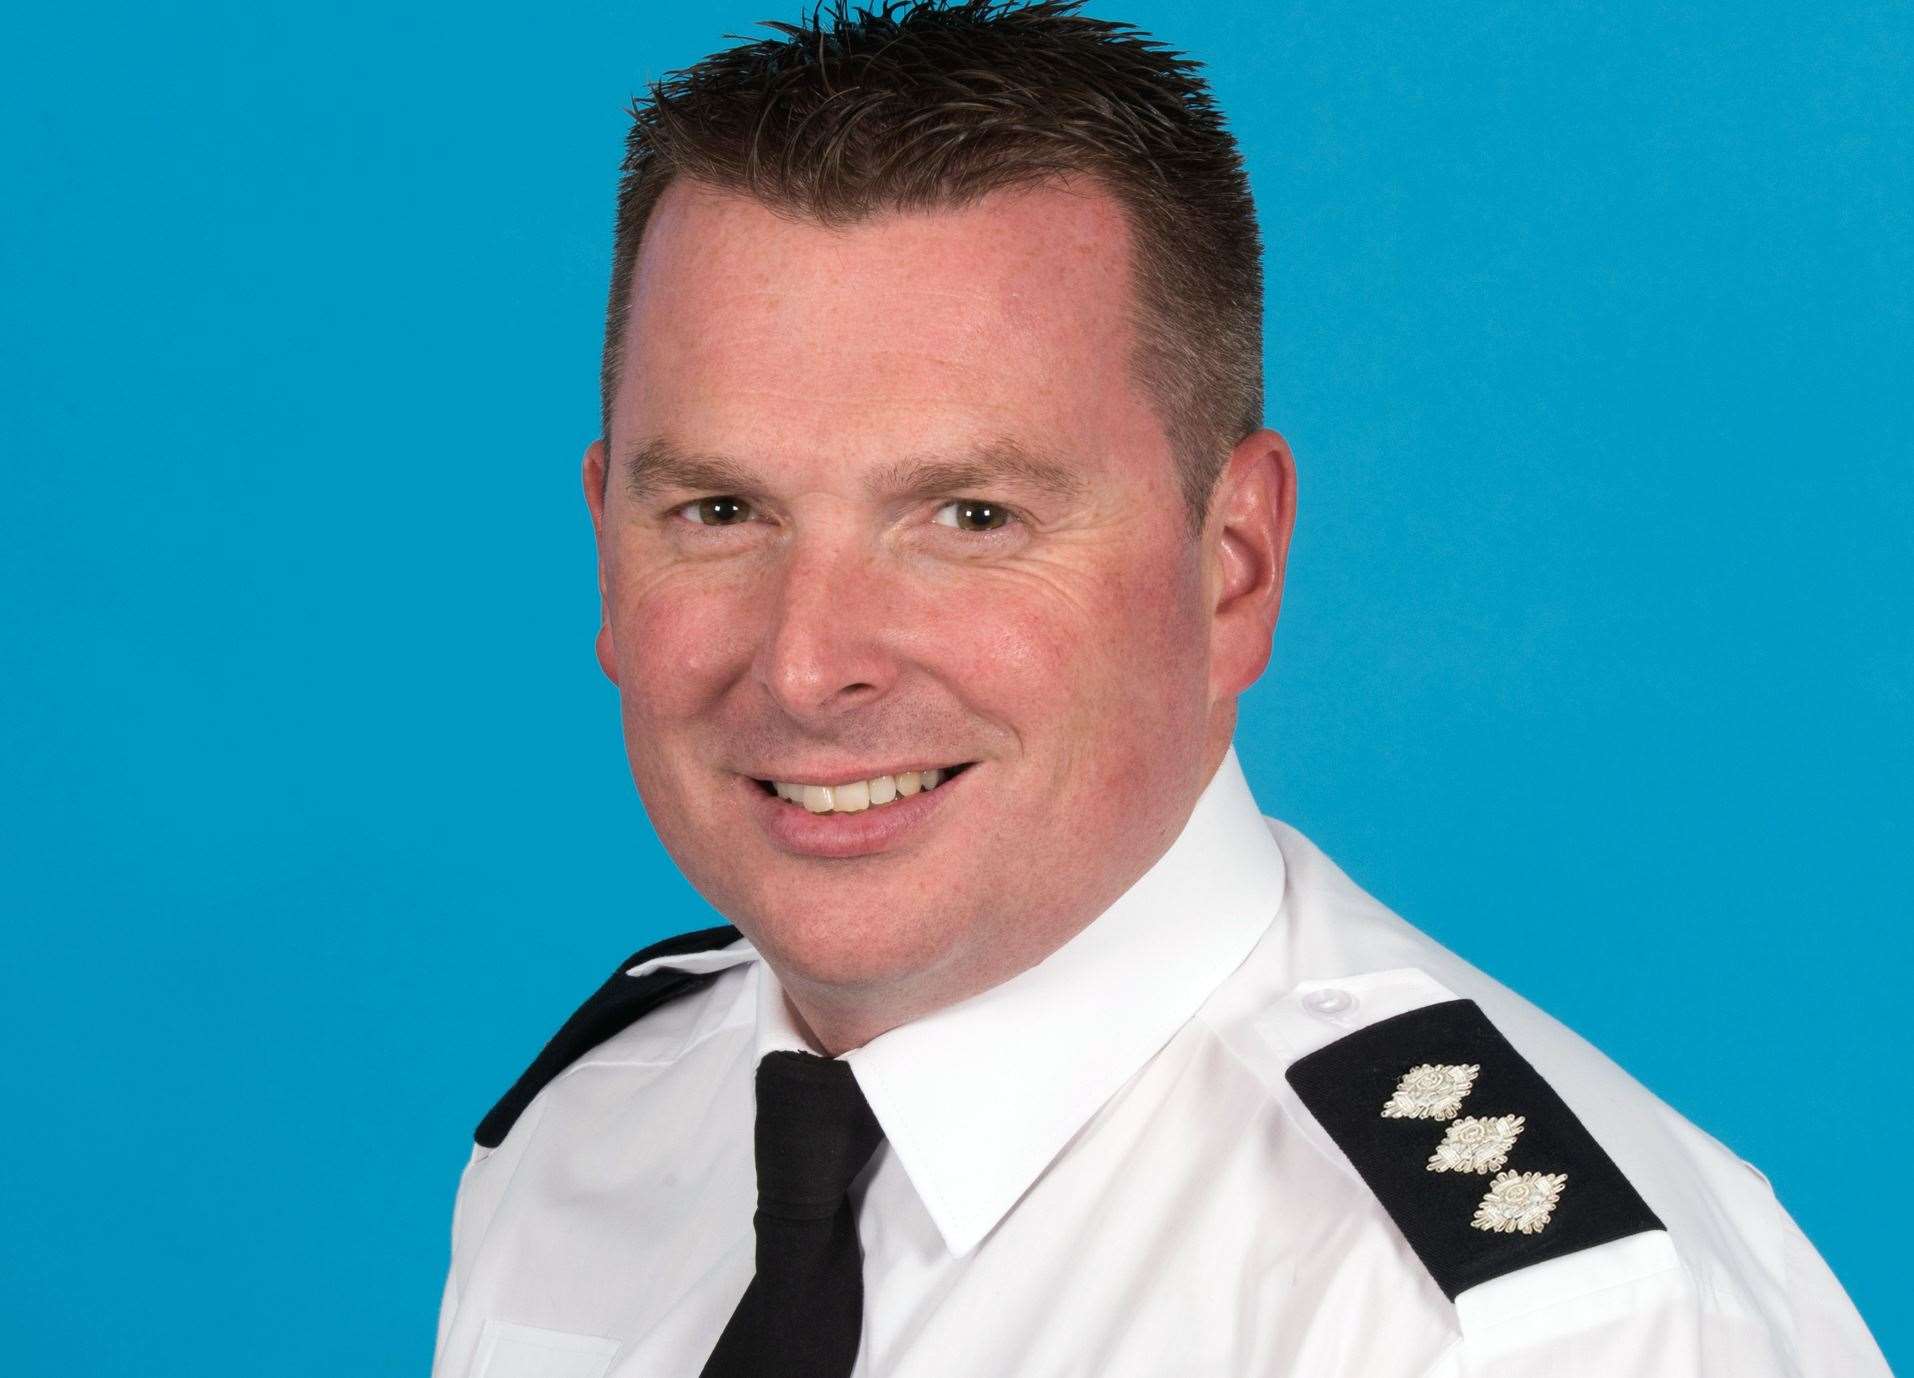 Chf Insp Nick Sparkes of Kent Police